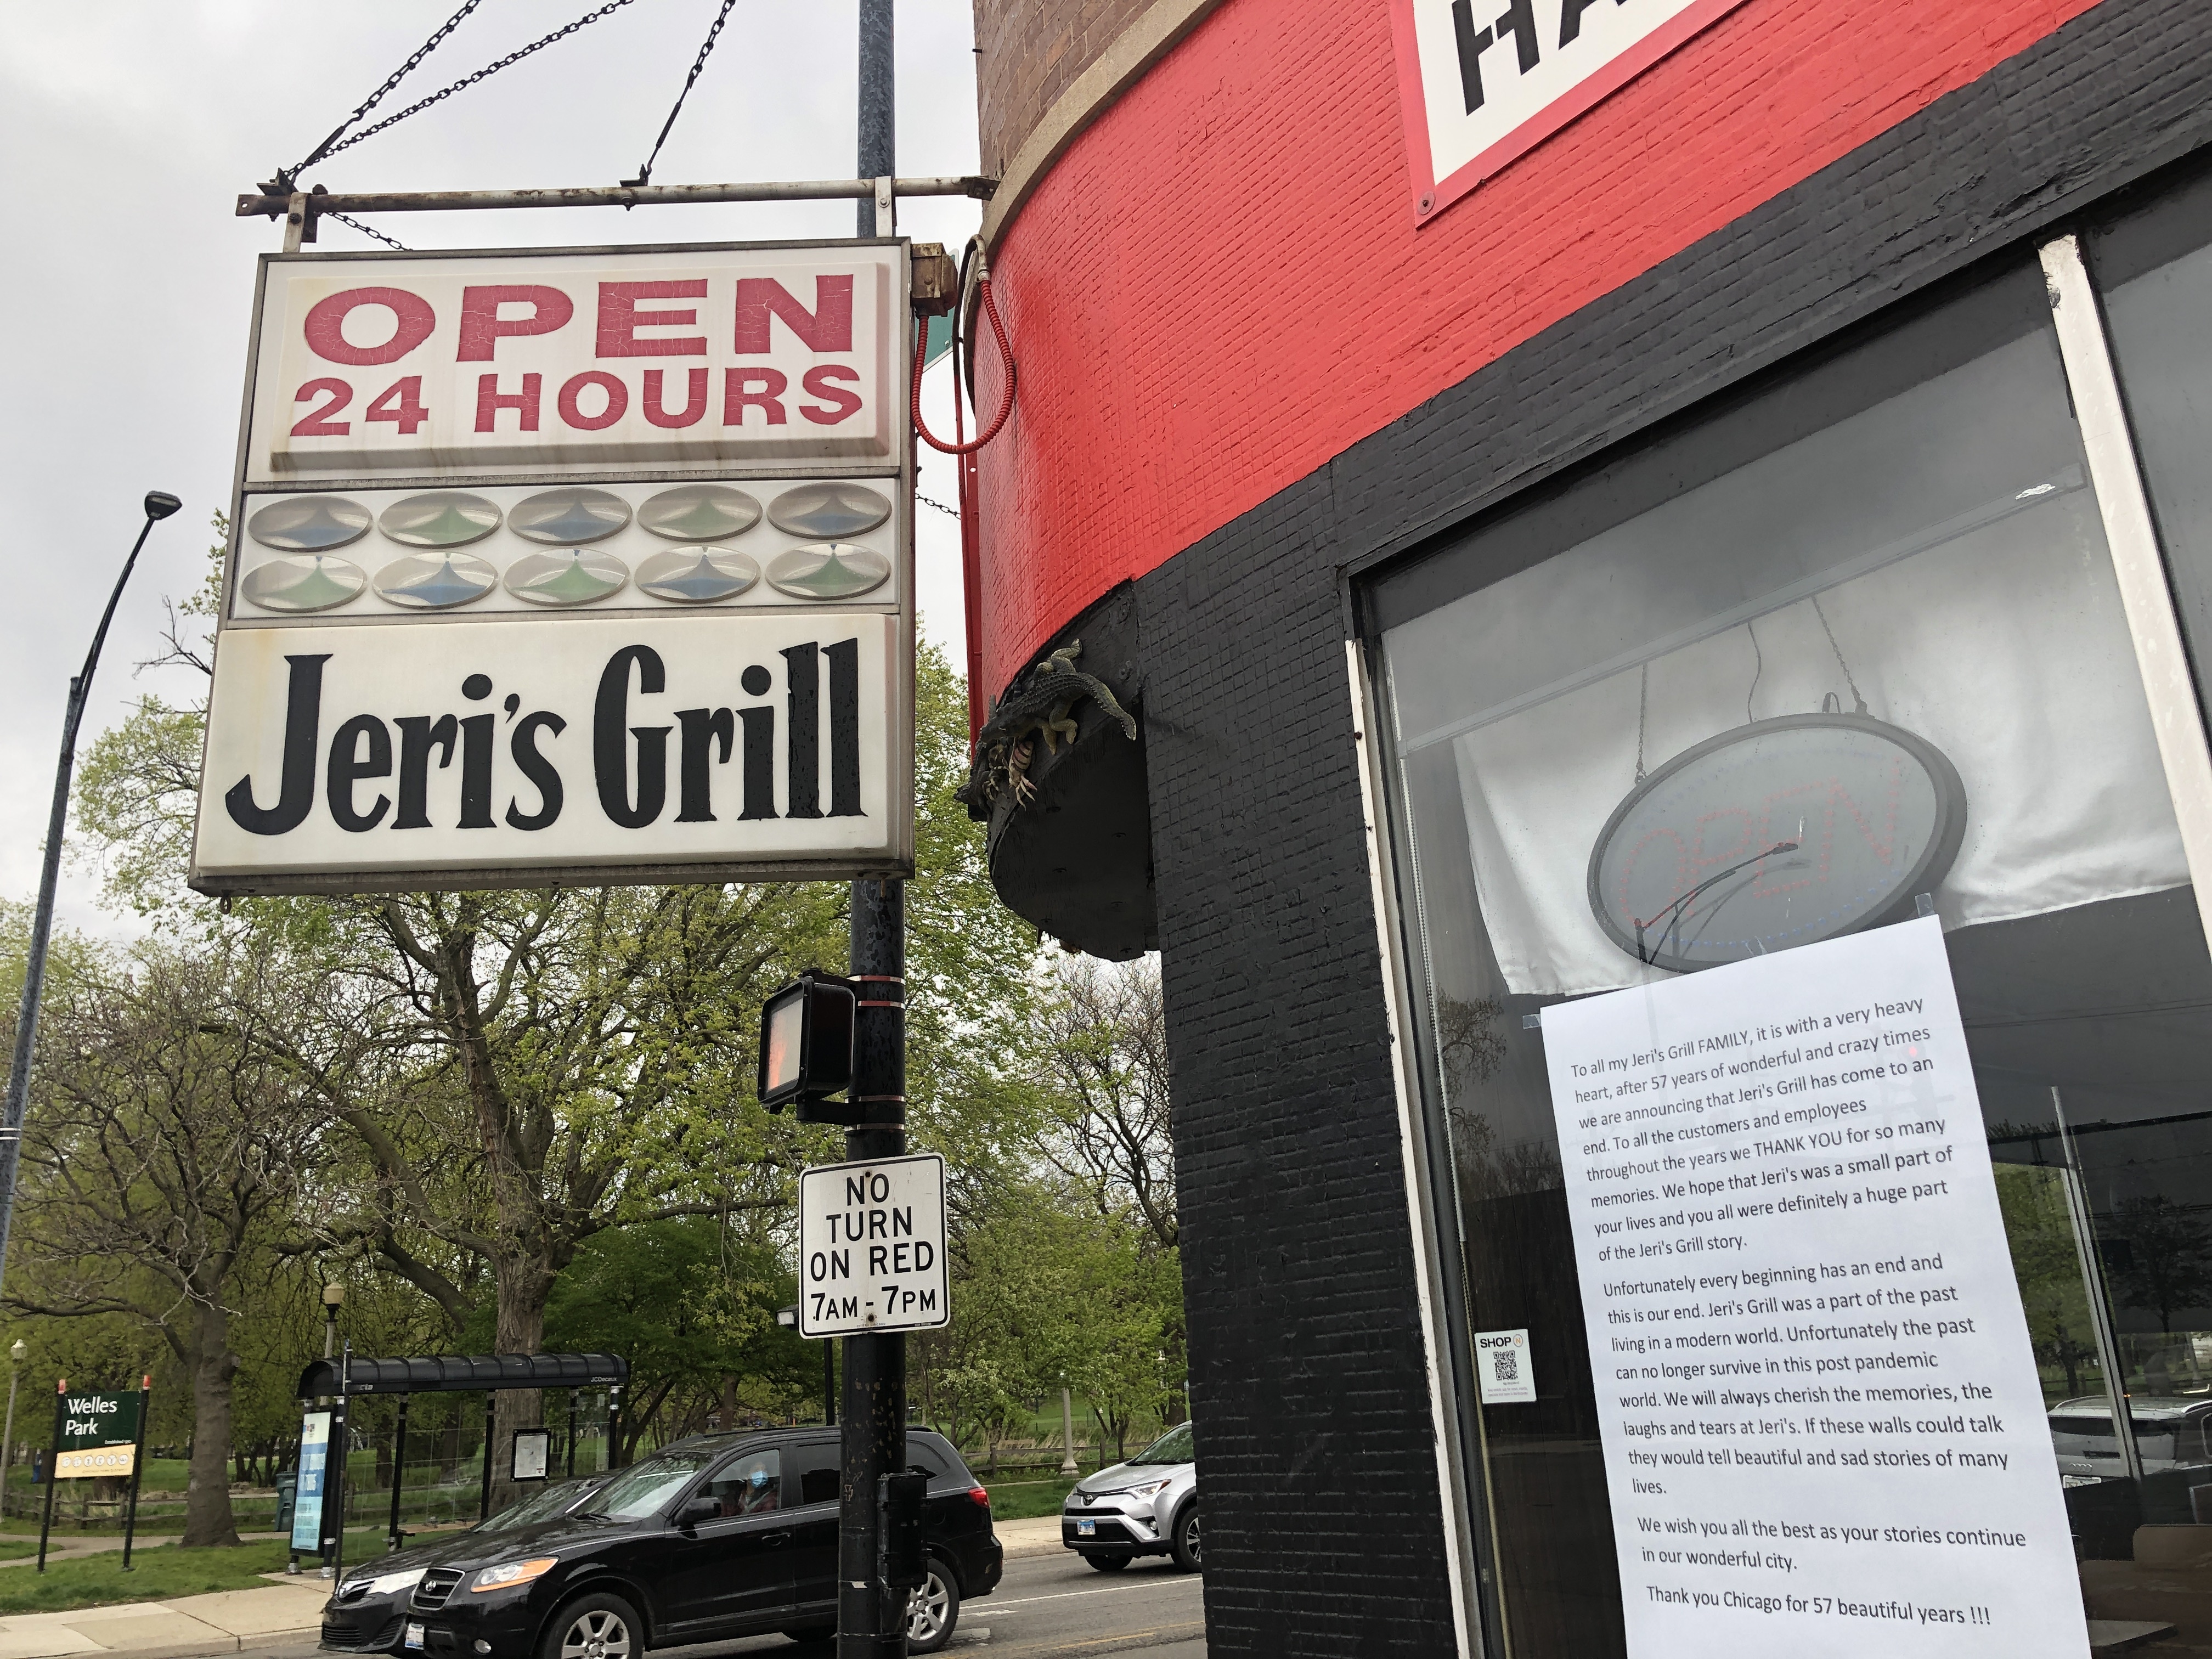 A sign reading “Open 24 Hours” and “Jeri’s Grill” hangs outside a diner.